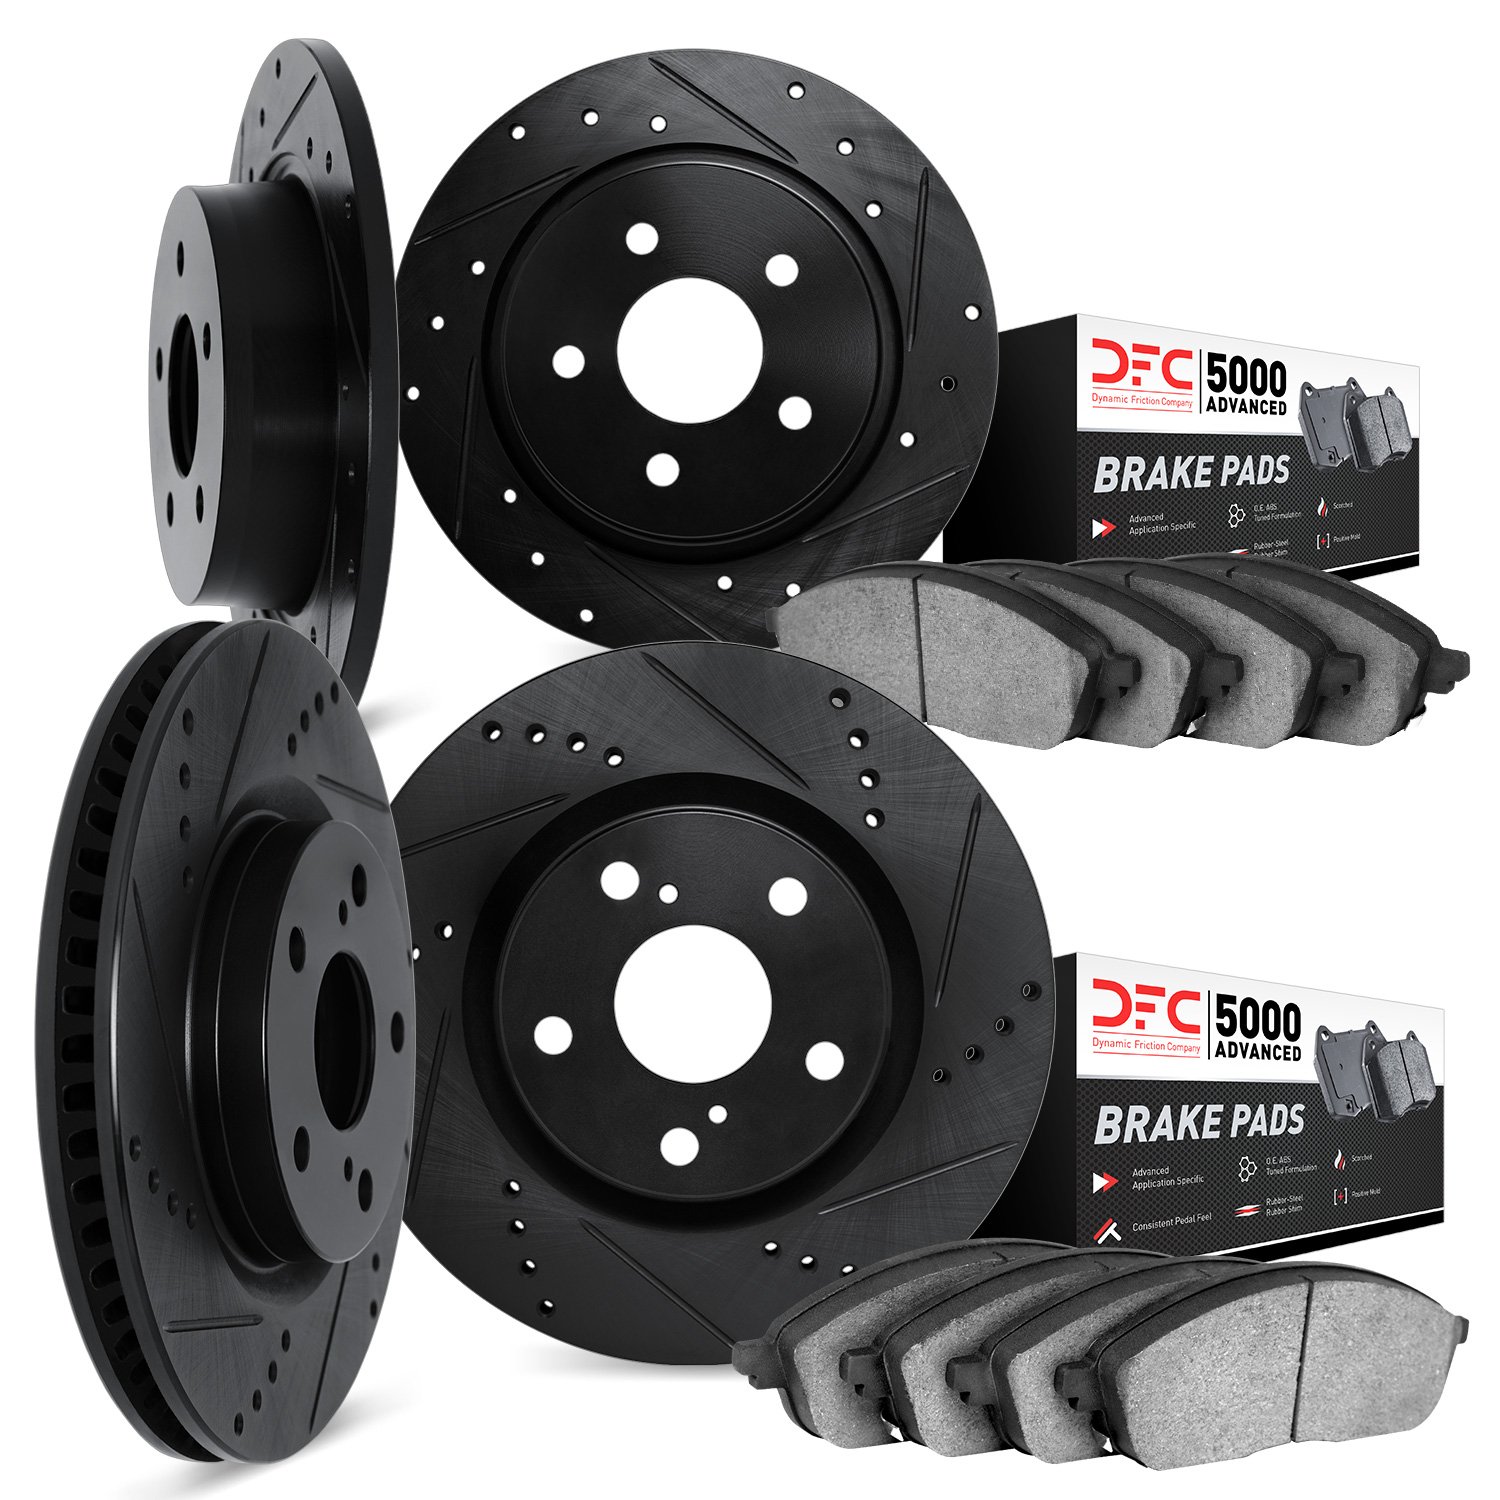 8504-76152 Drilled/Slotted Brake Rotors w/5000 Advanced Brake Pads Kit [Black], 2002-2006 Lexus/Toyota/Scion, Position: Front an